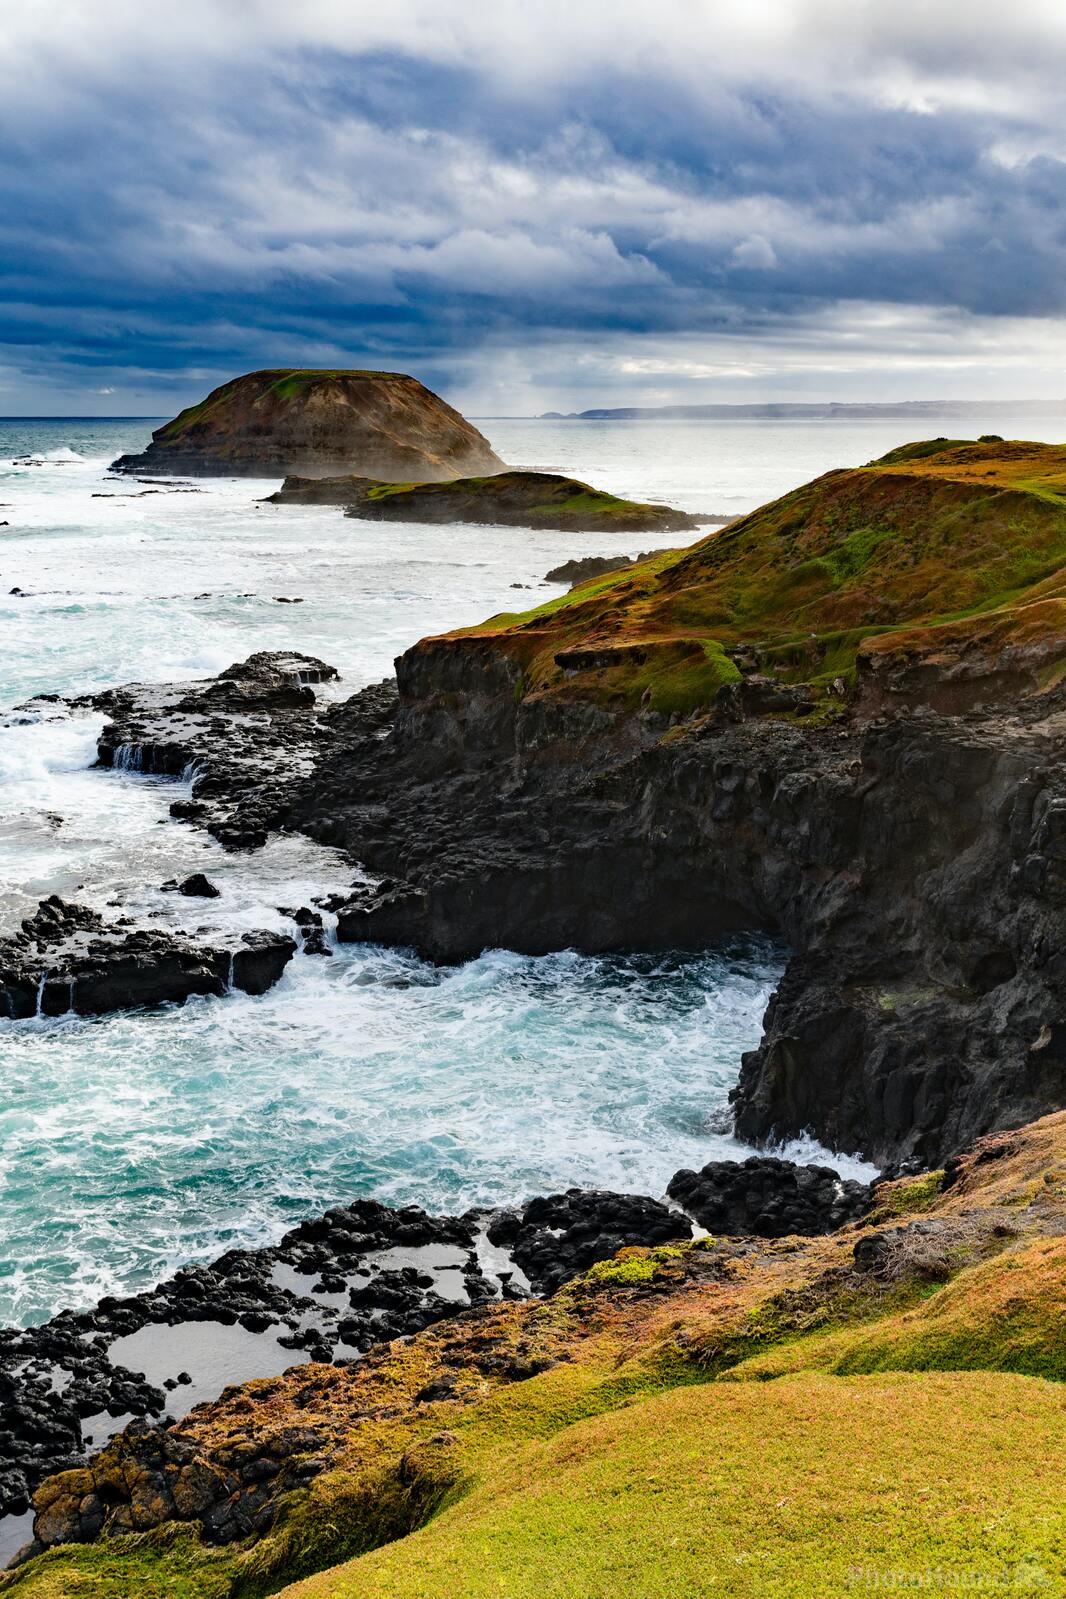 Image of Round Island from The Nobbies Viewpoint by Team PhotoHound